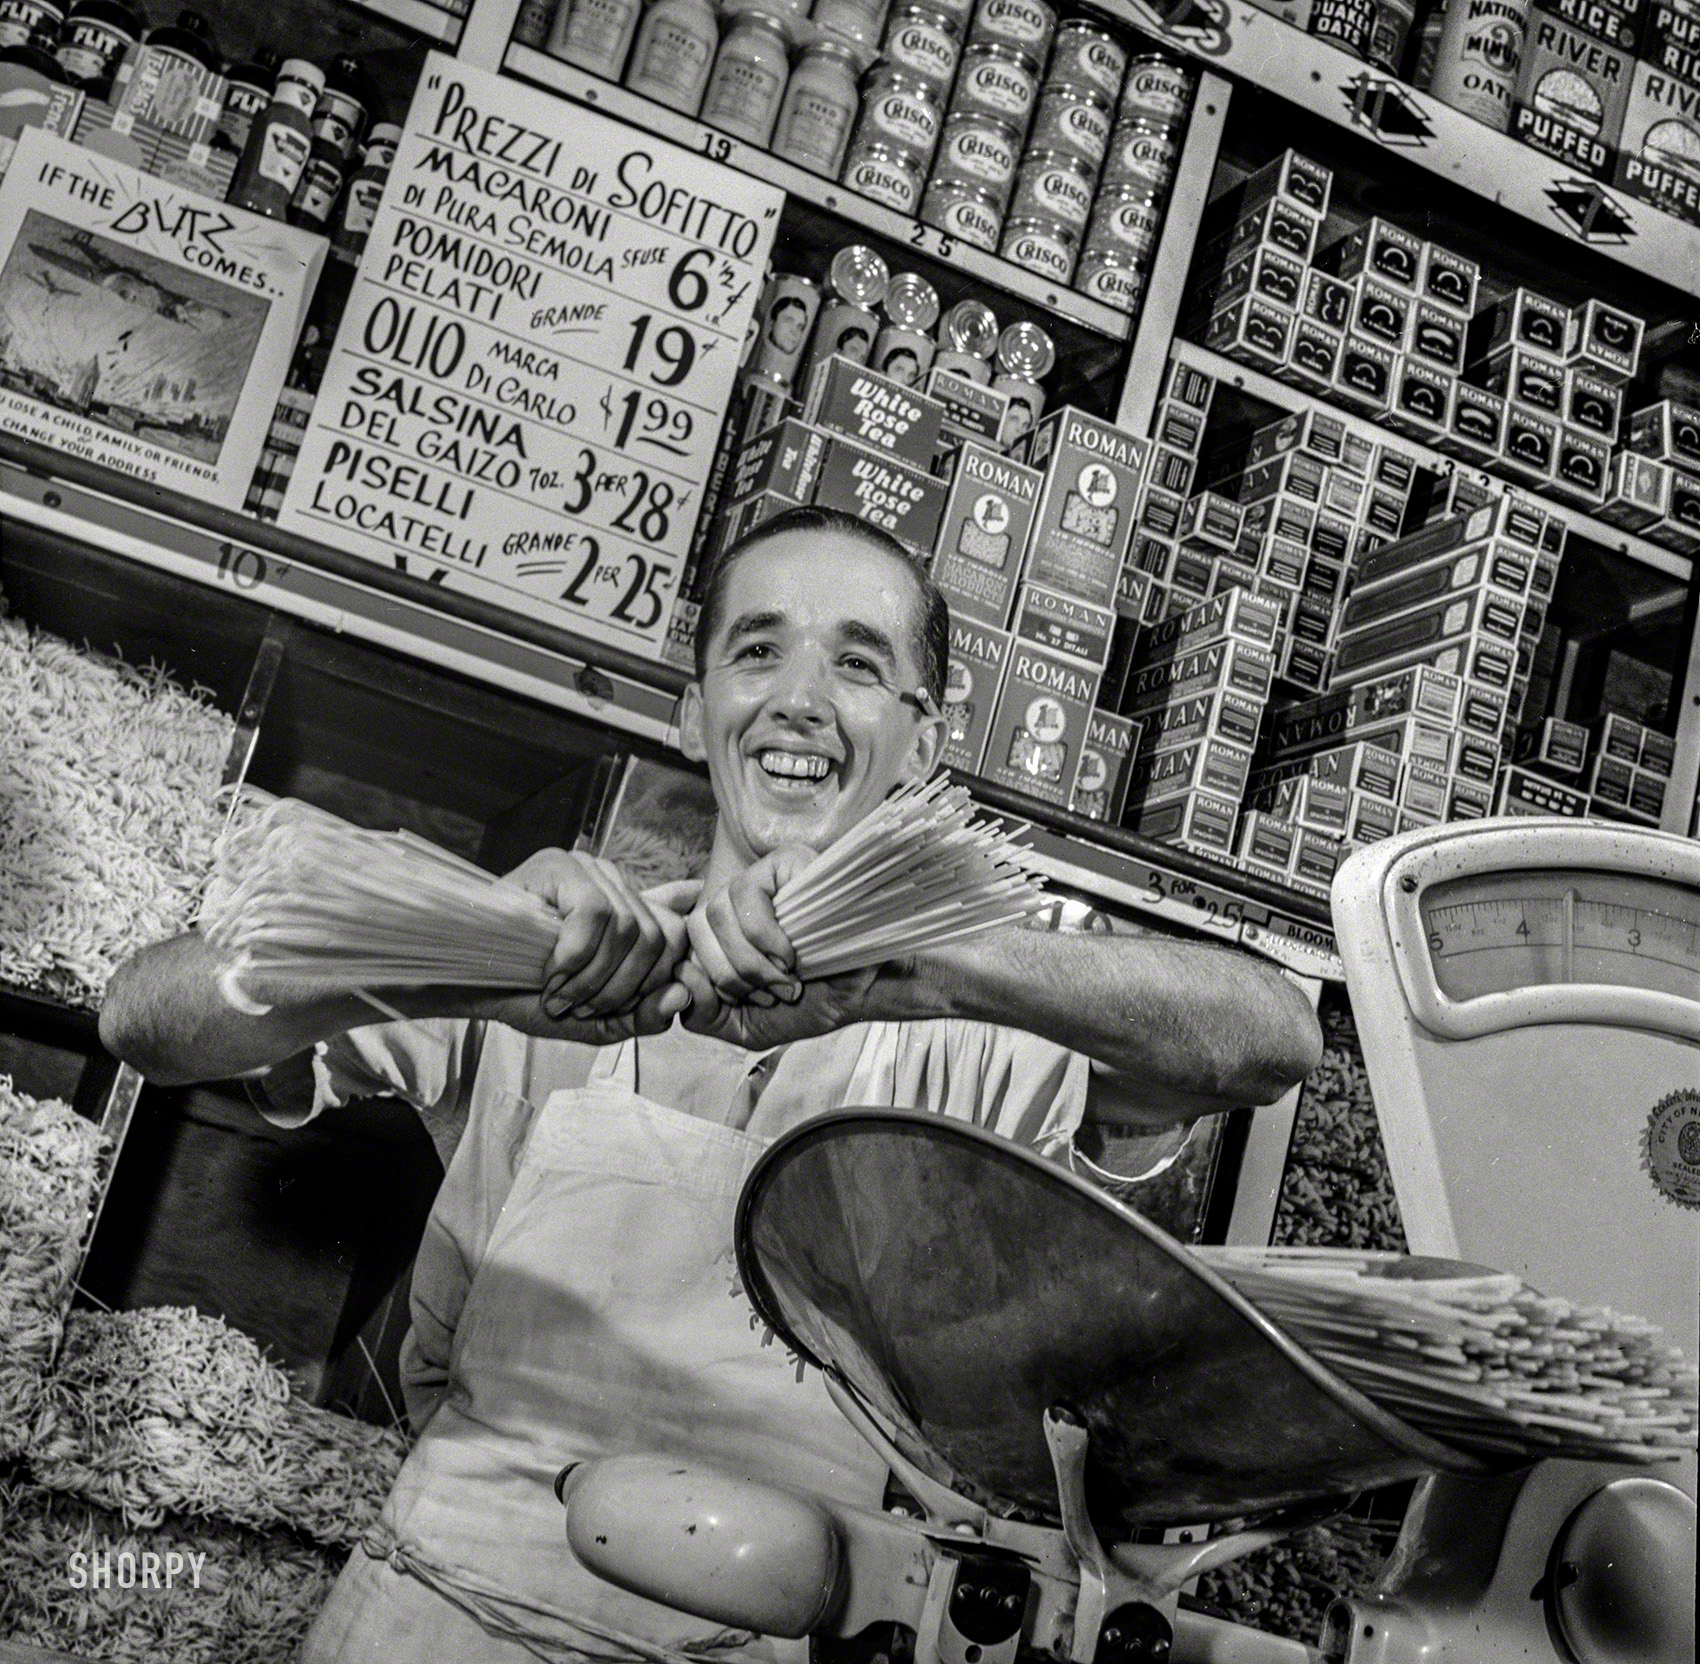 July 1942. "Posting ceiling prices in foreign languages. Charles Ruggiero, clerk in a grocery store in New York's Italian section, wishes the handful of spaghetti he is breaking were Mussolini's neck. The ceiling price sign above his head, written in Italian, is helping to defeat Il Duce by controlling inflation, one of America's most dangerous enemies." Medium format negative by Howard Liberman for the Office of War Information. View full size.